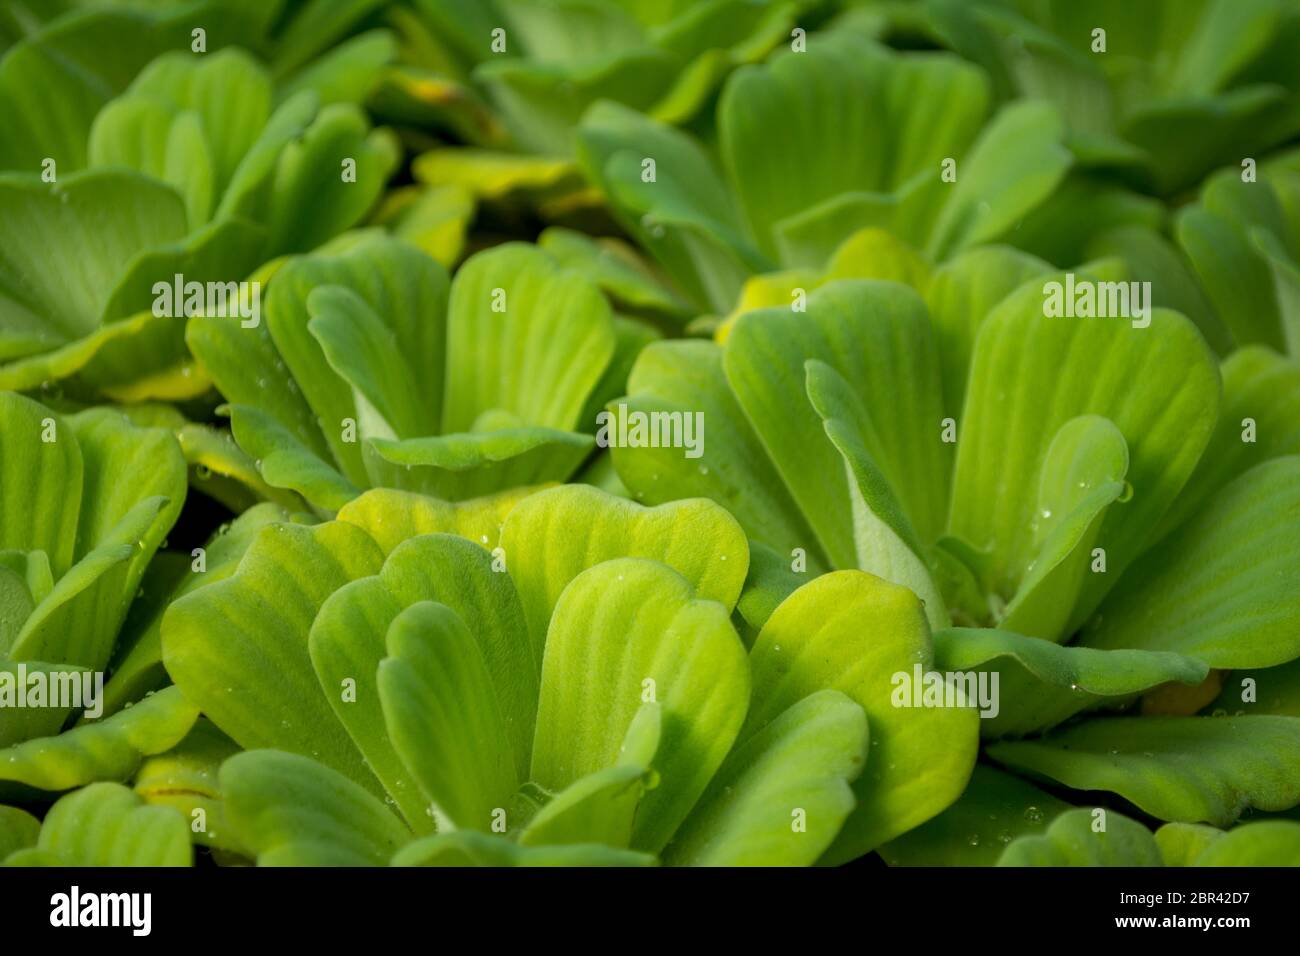 Water Lettuce or Cabbage Shell Flower, Pistia stratiotes, Araceae Stock Photo